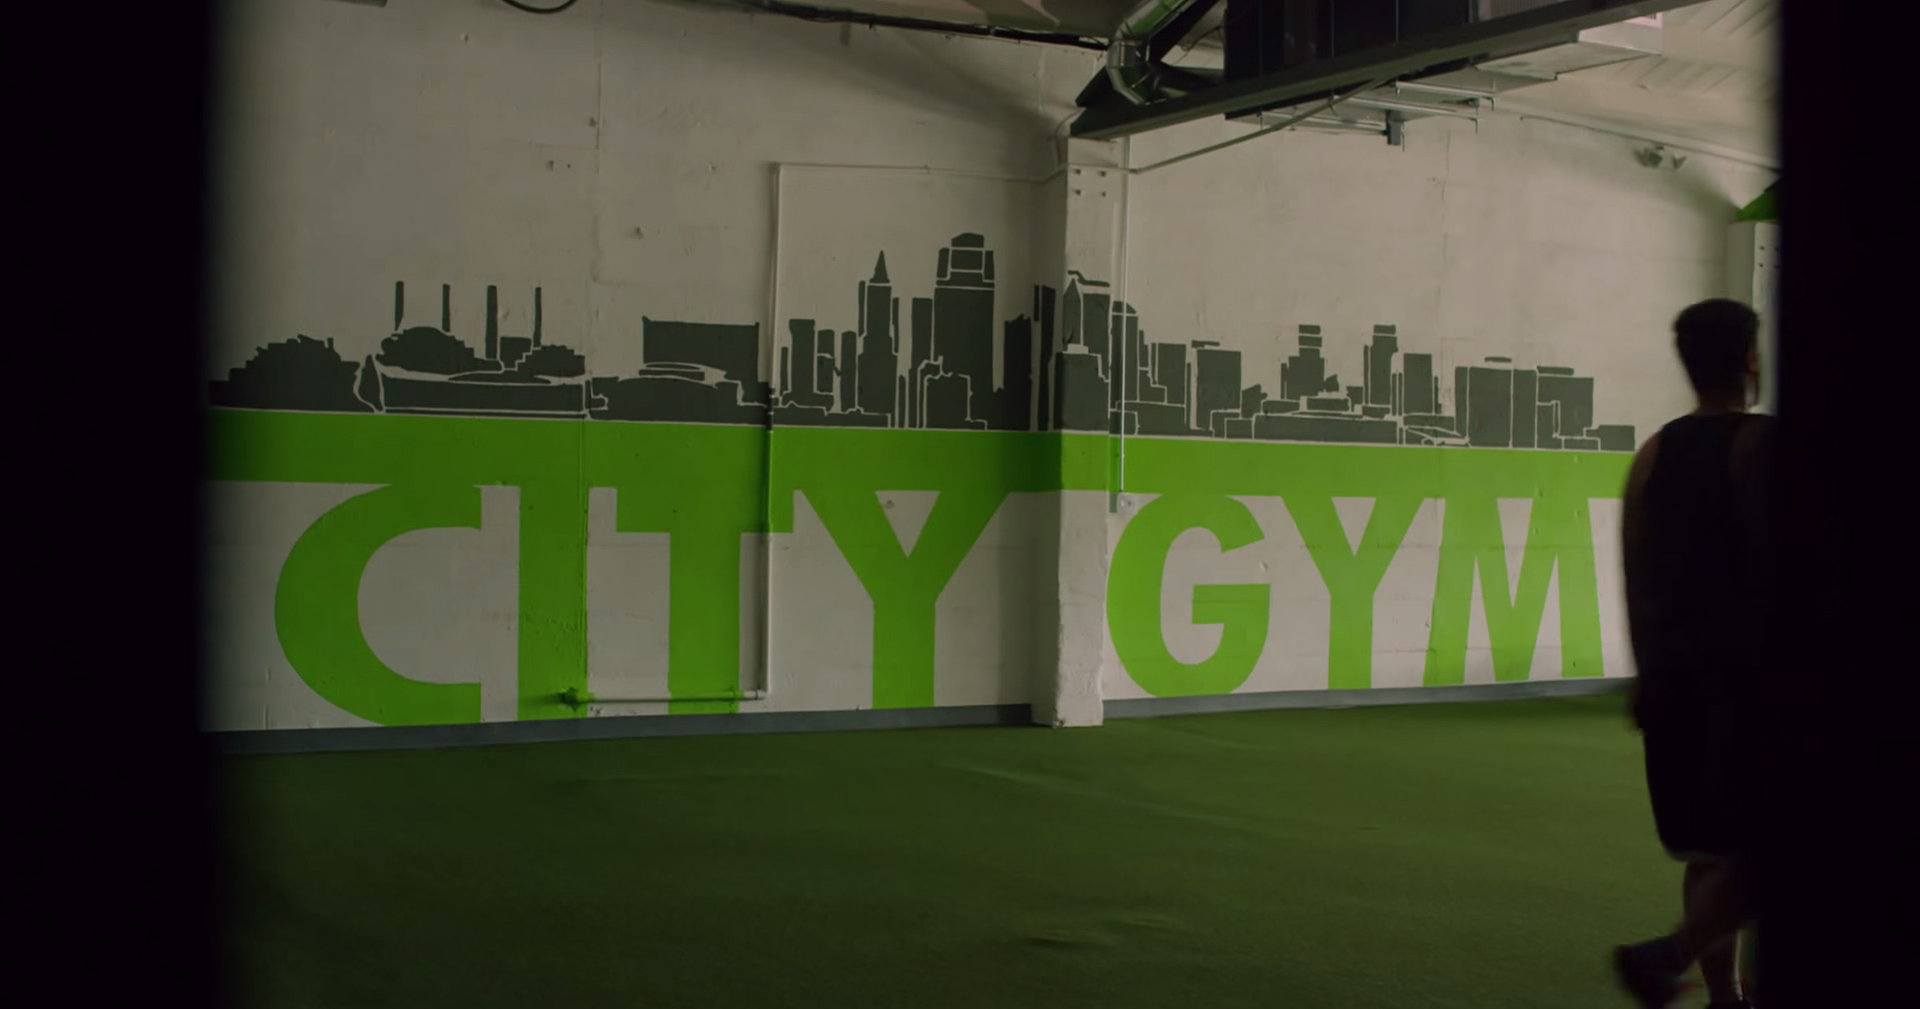 PHOTO: A screen grab from the Google commercial "The Story of Jacob and City Gym."